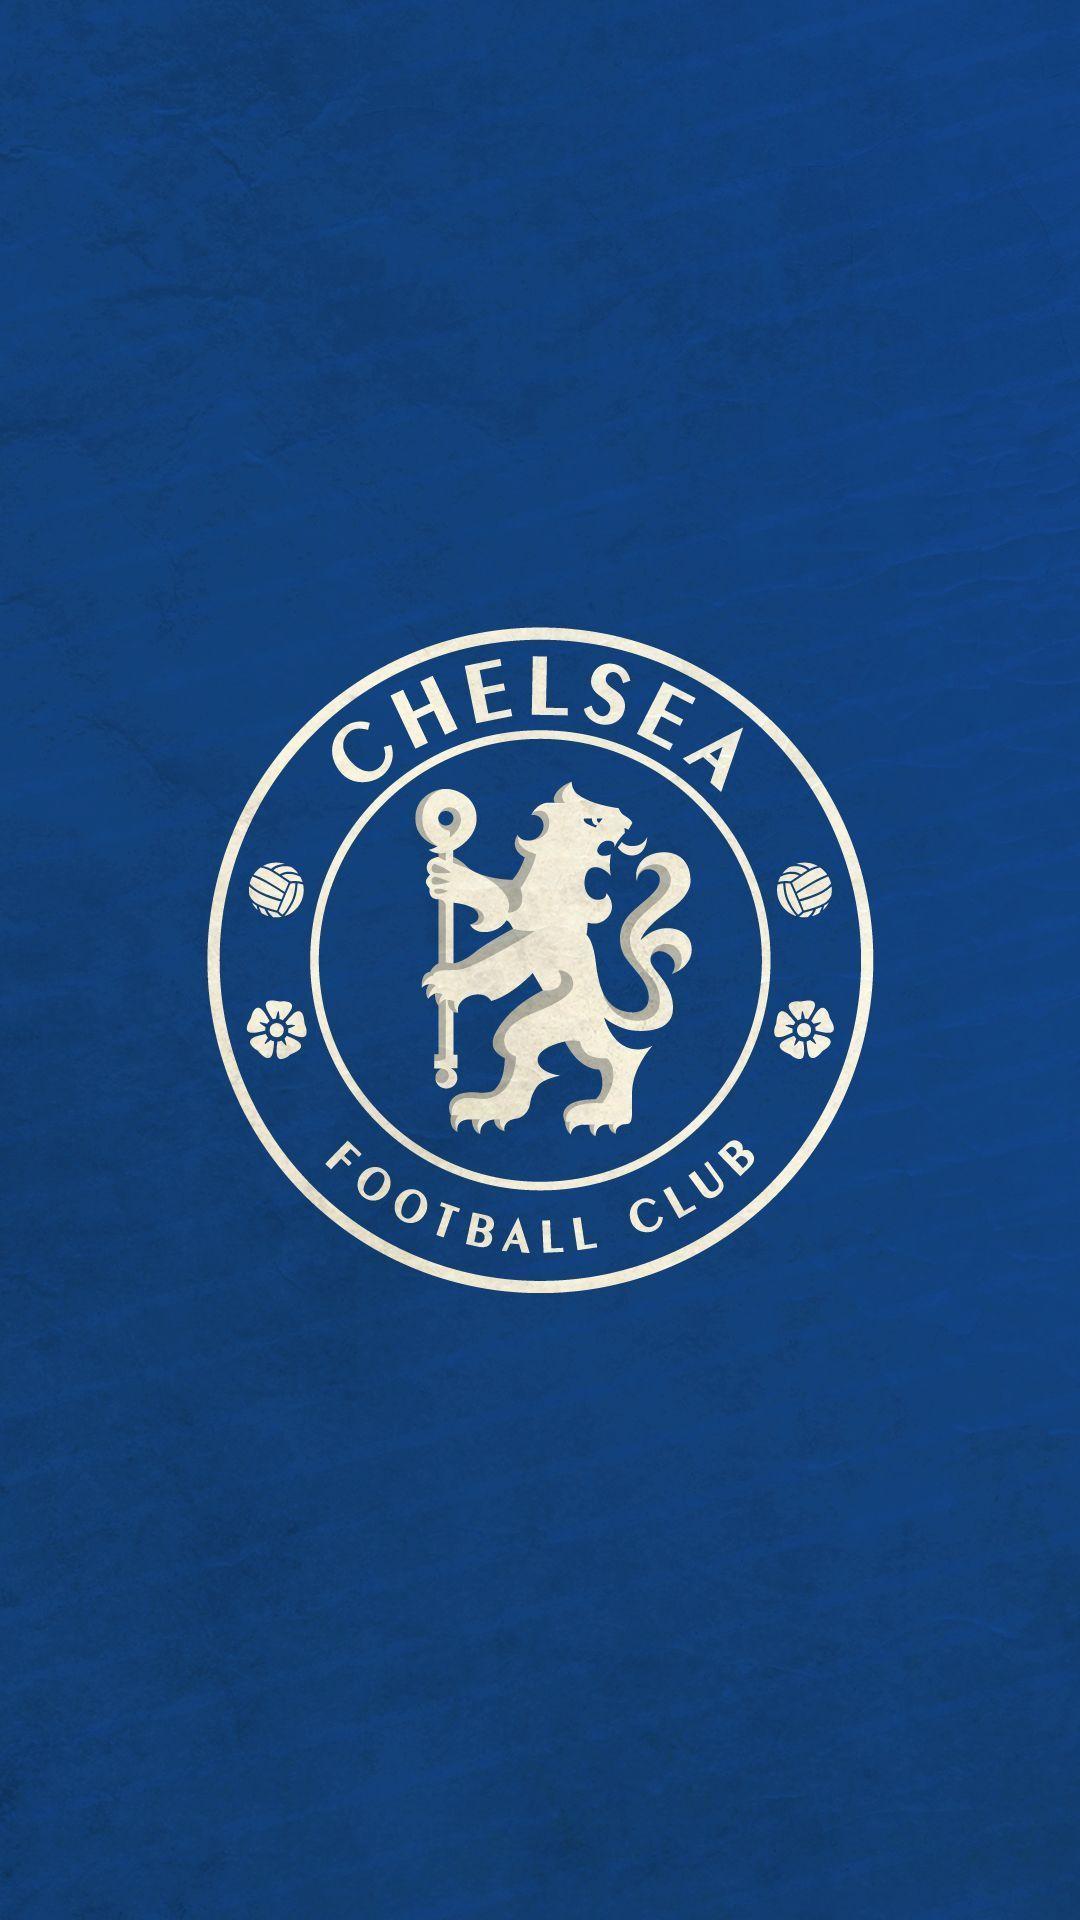 All You Need To Know About Football. Chelsea FC, Chelsea FC